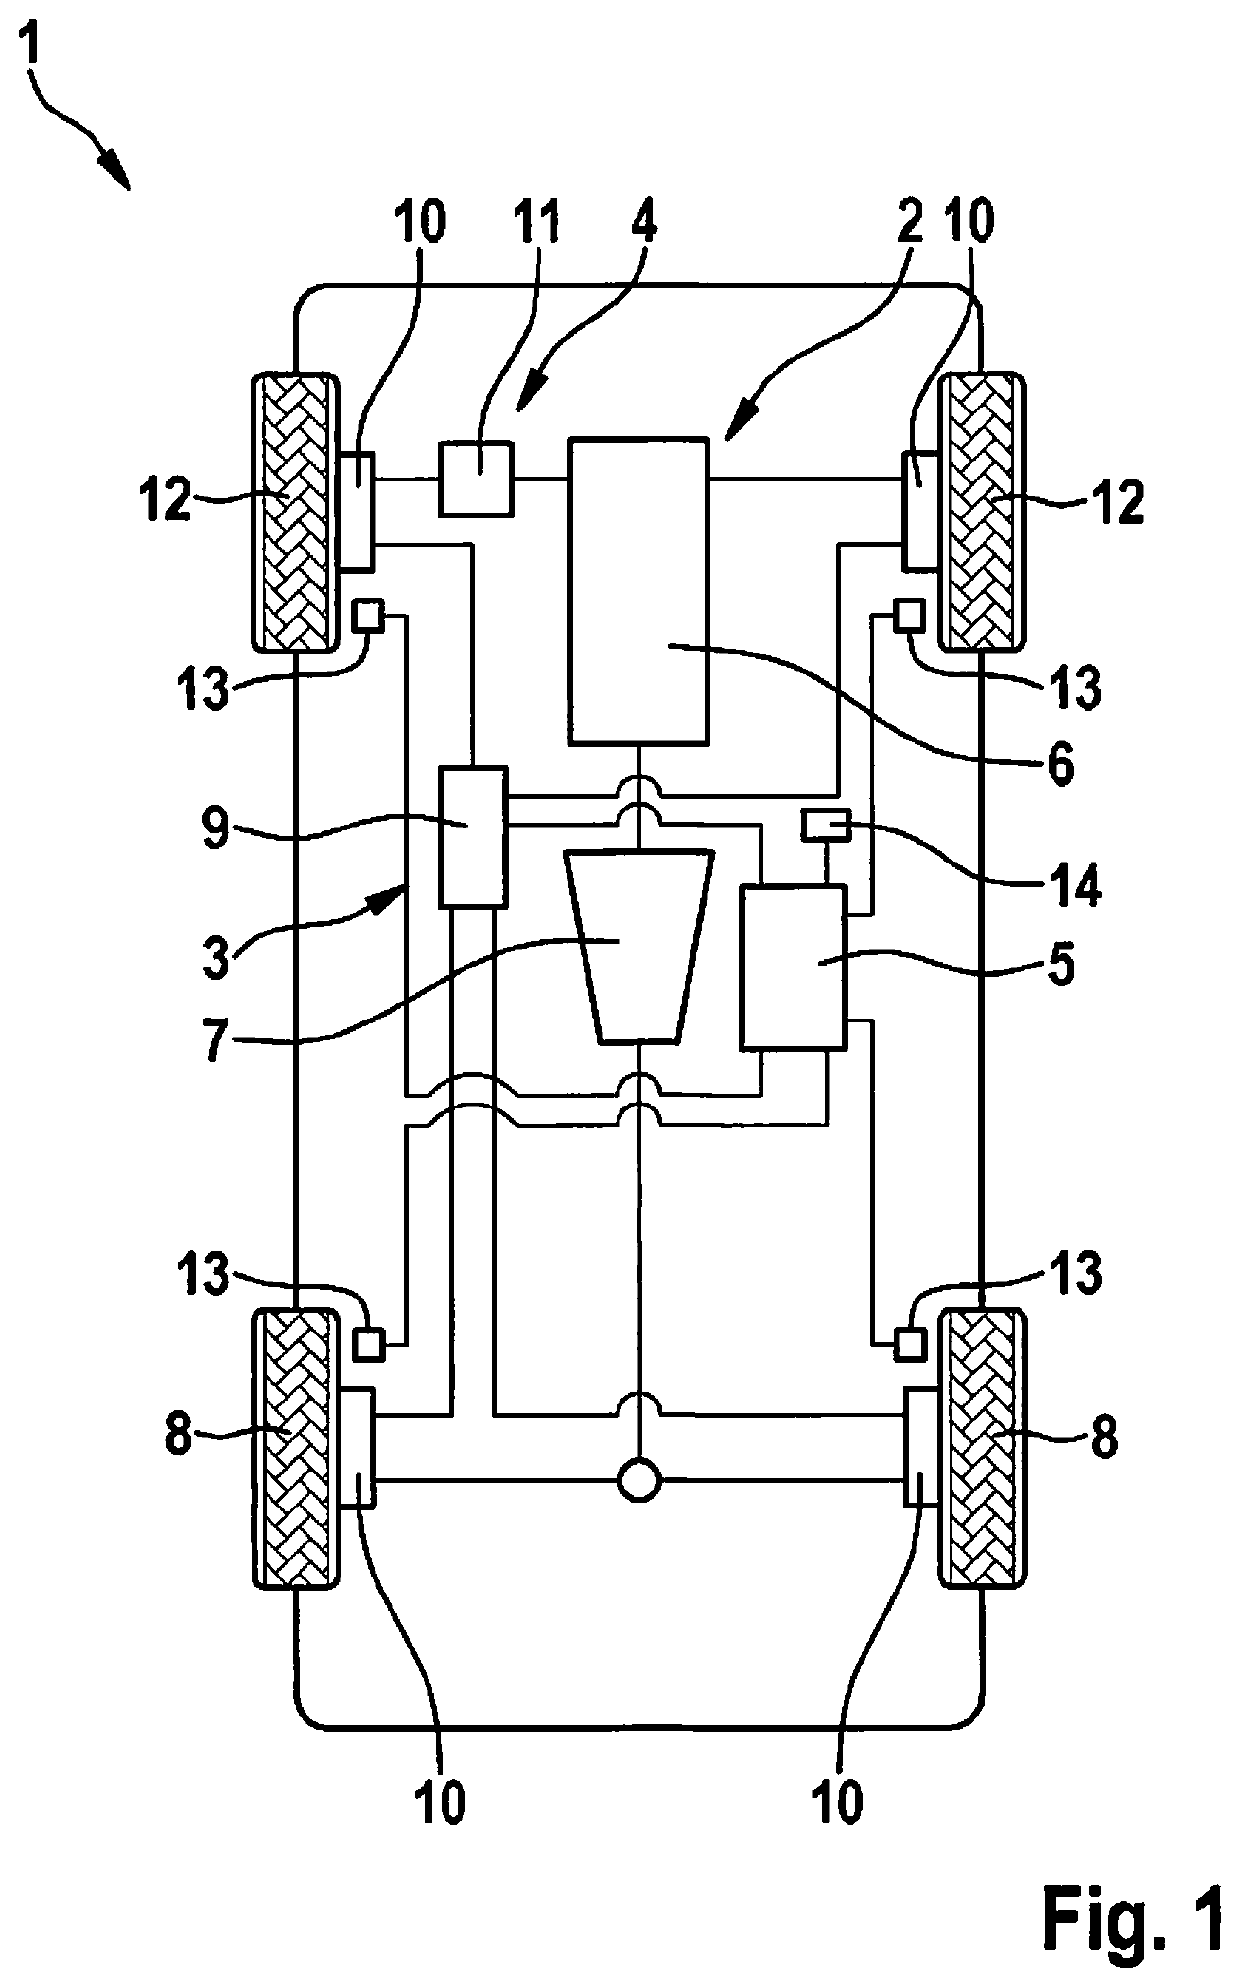 Method and device for operating a motor vehicle capable of partly or fully autonomous driving